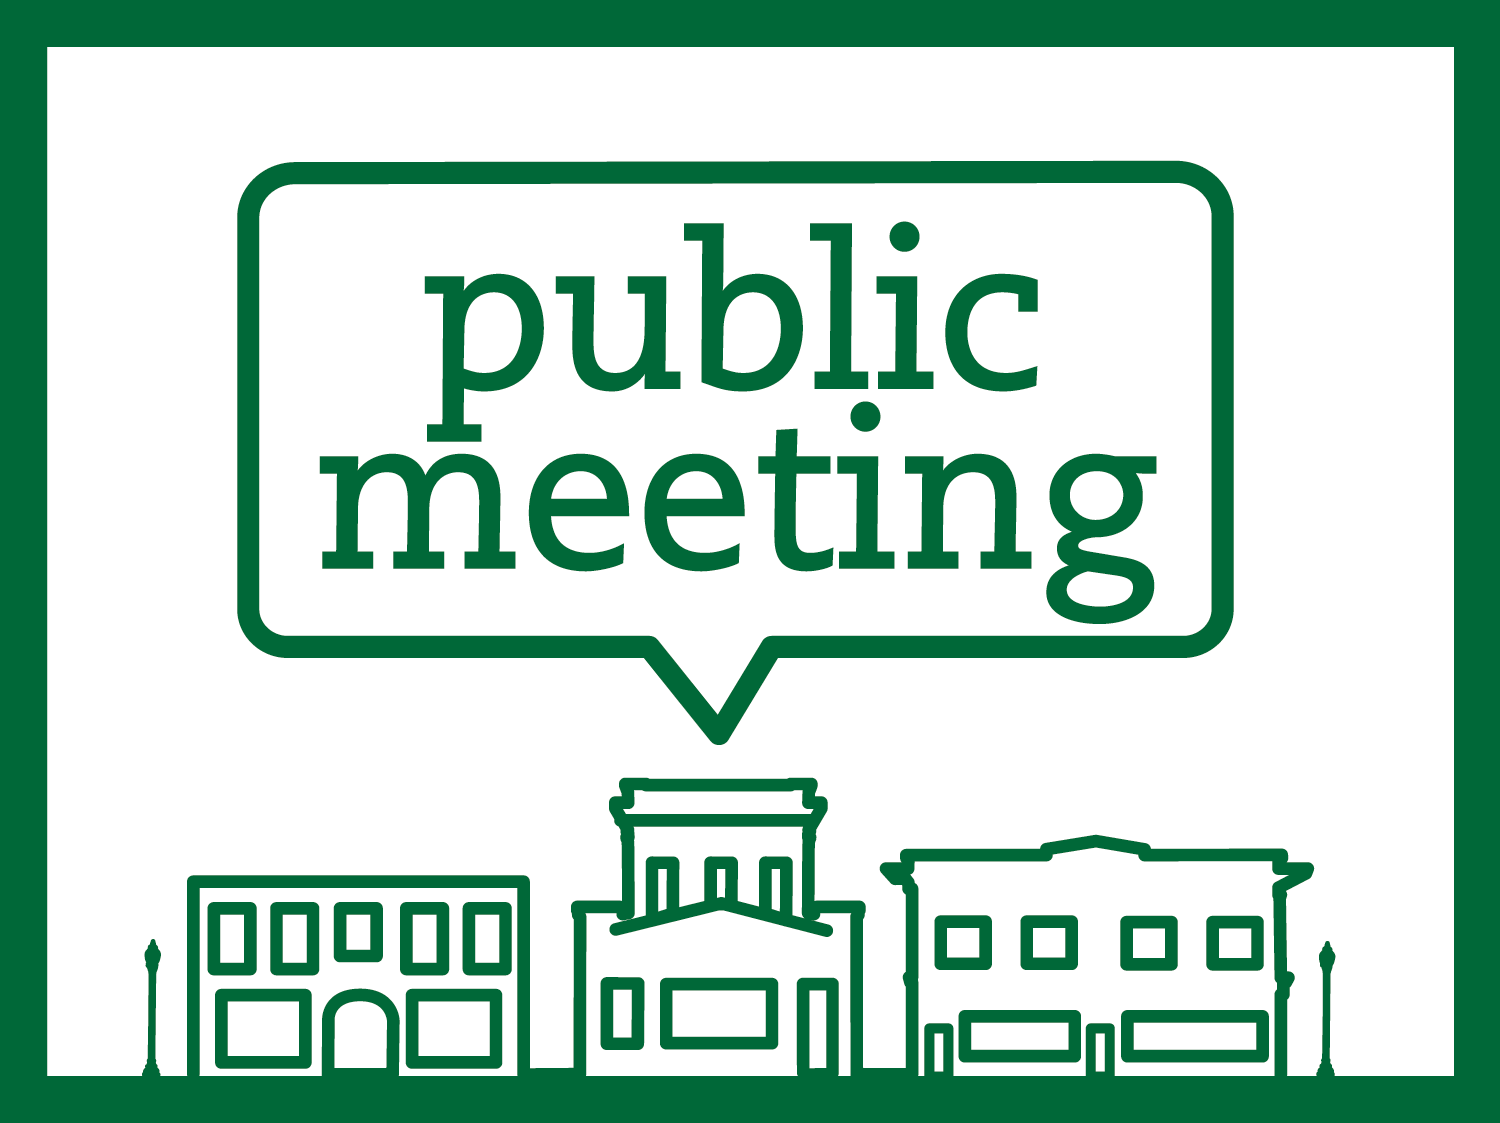 Public Meeting text with buildings below.